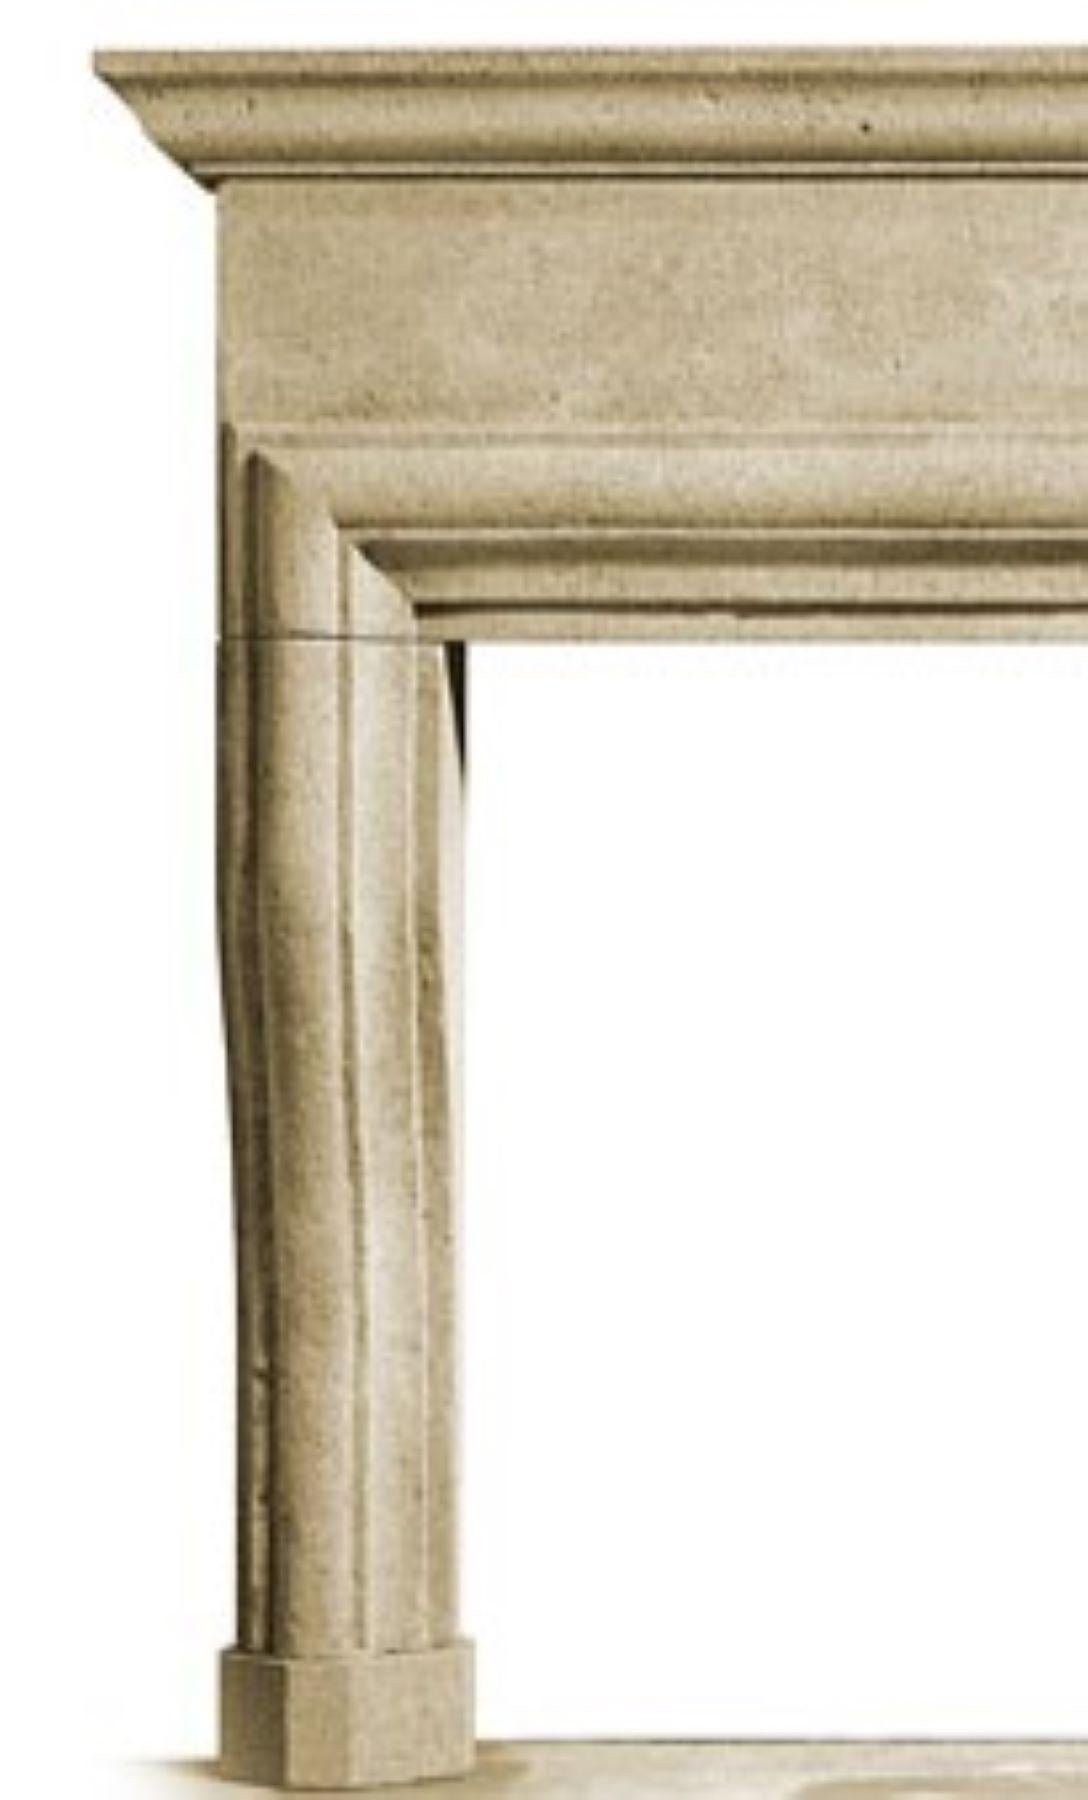 Inspired by the many charming country homes of the Provence region in the South of France, The Provencale stone fireplace evokes a classic Country French feel, with its deep top shelf piece, the generous lintel below that, and the legs that gently